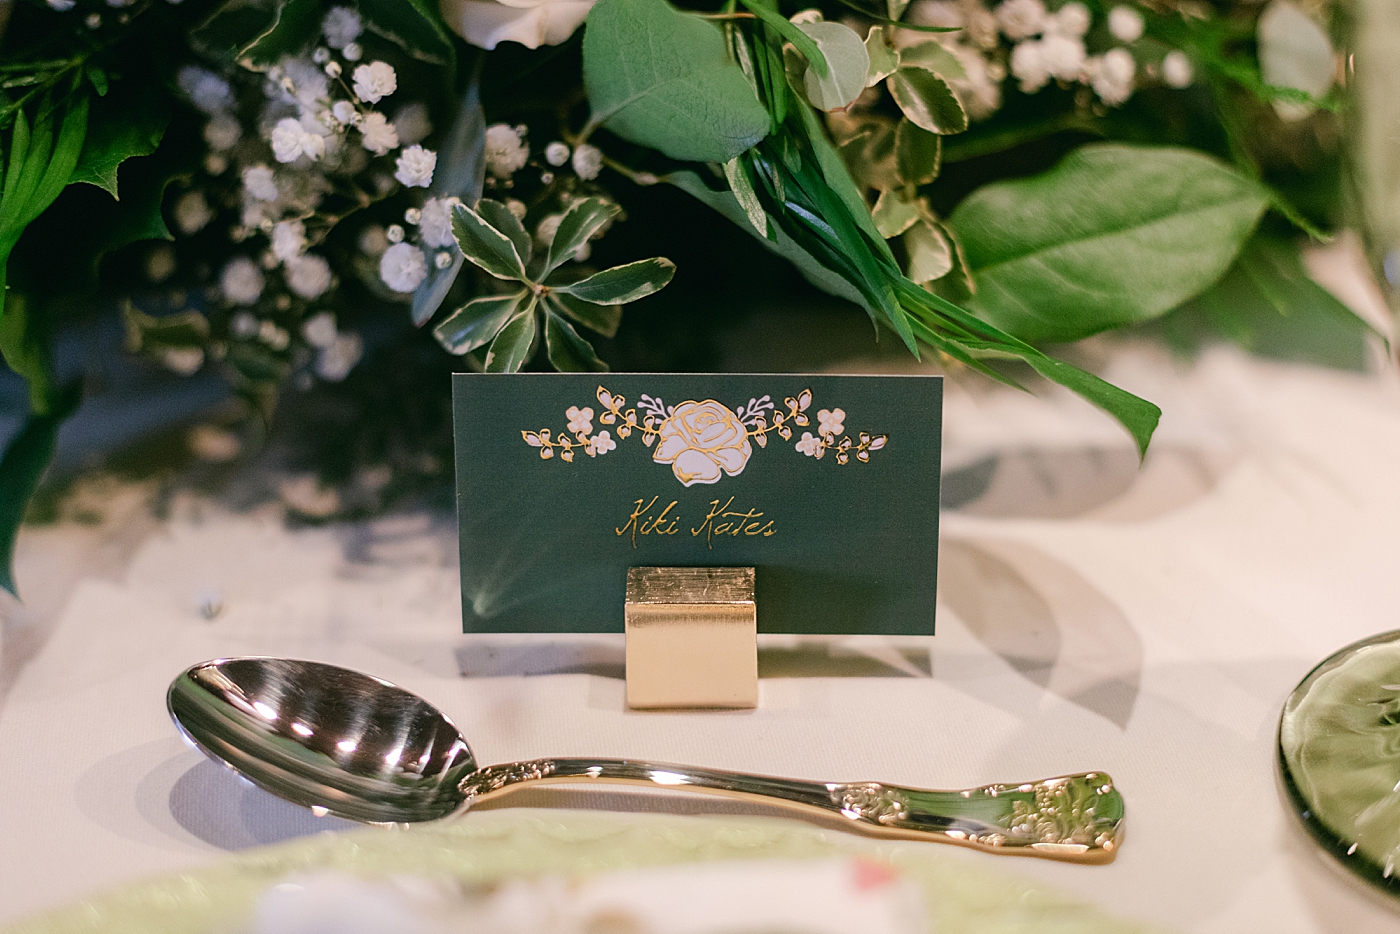 Green table settings with gold details | Image by Hope Helmuth Photography